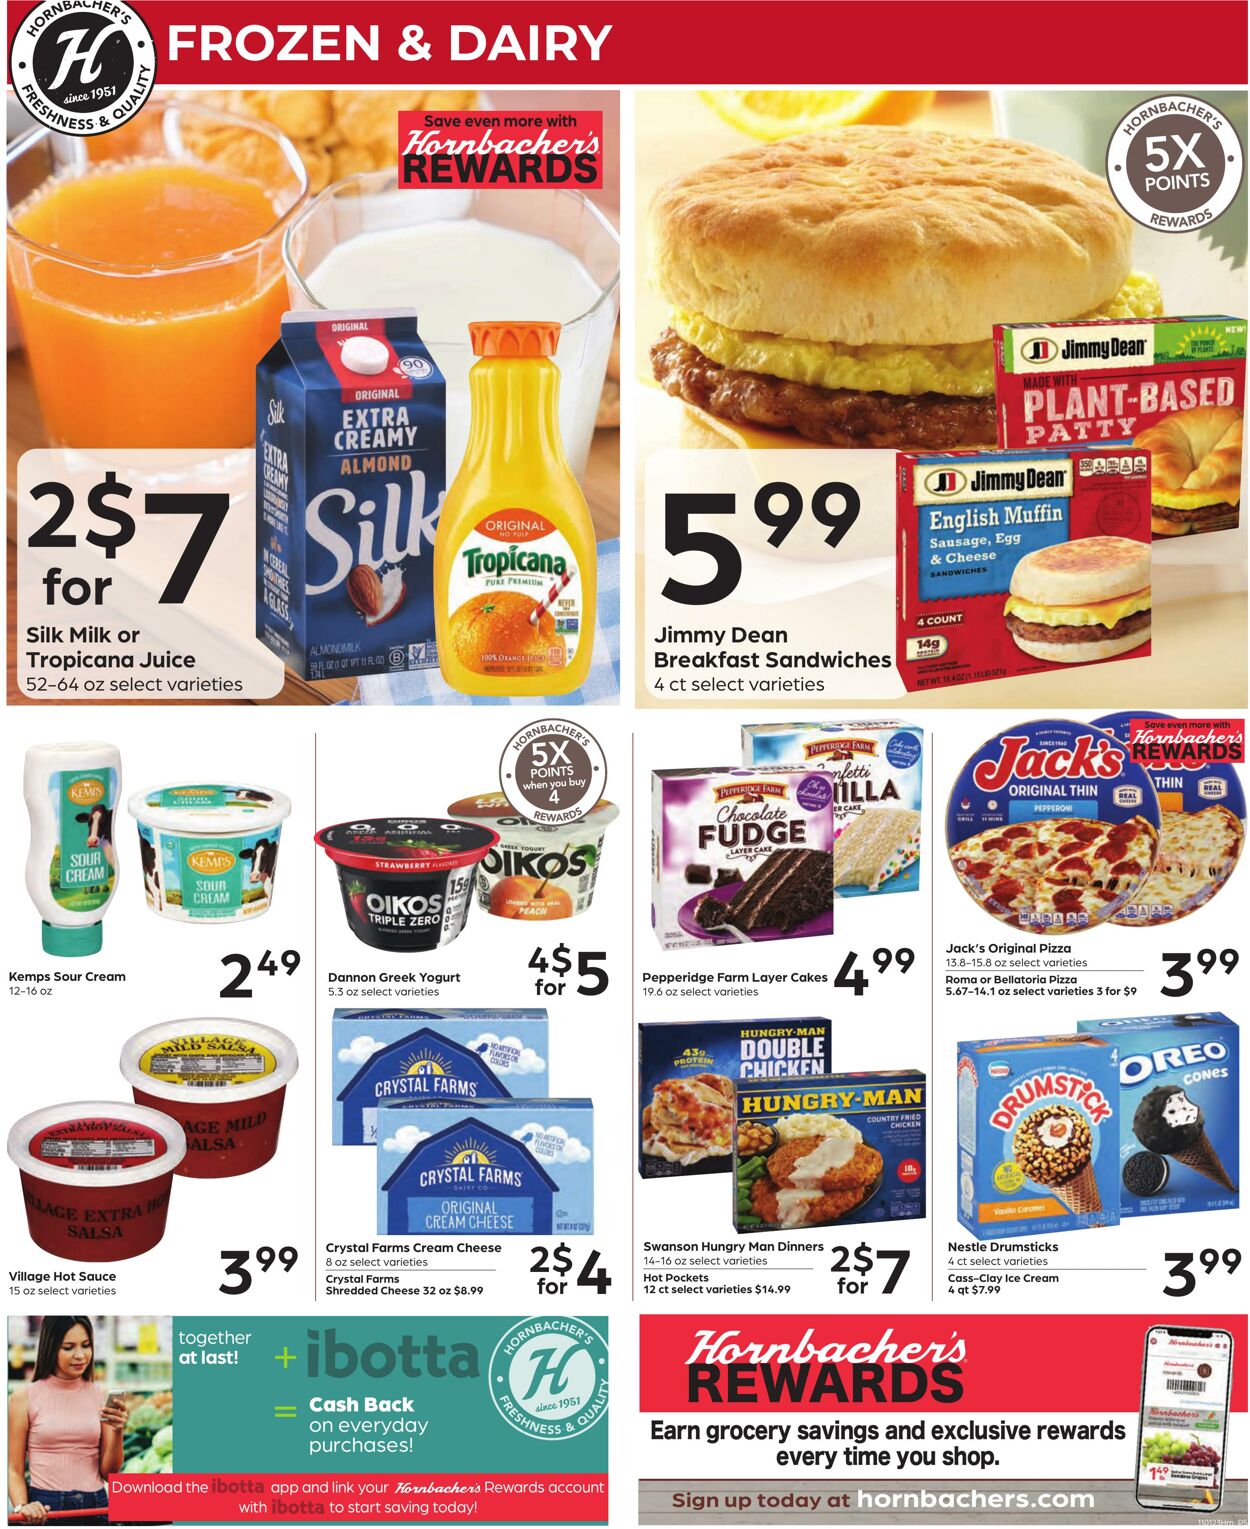 Weekly ad Hornbacher's 11/01/2023 - 11/07/2023